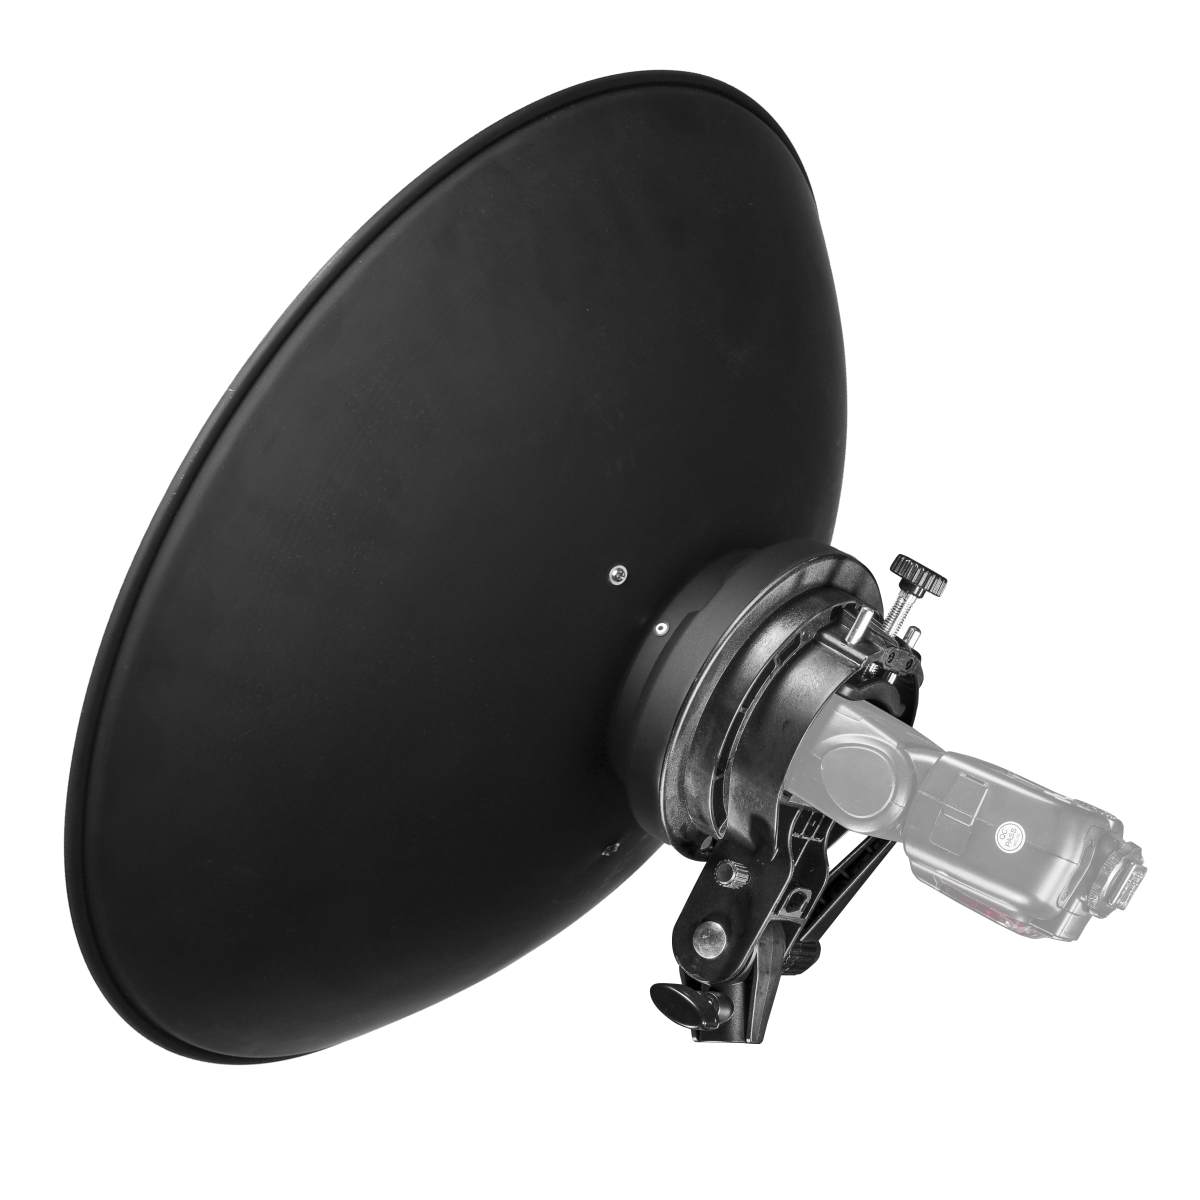 Walimex Beauty Dish 41cm for Compact Flashes